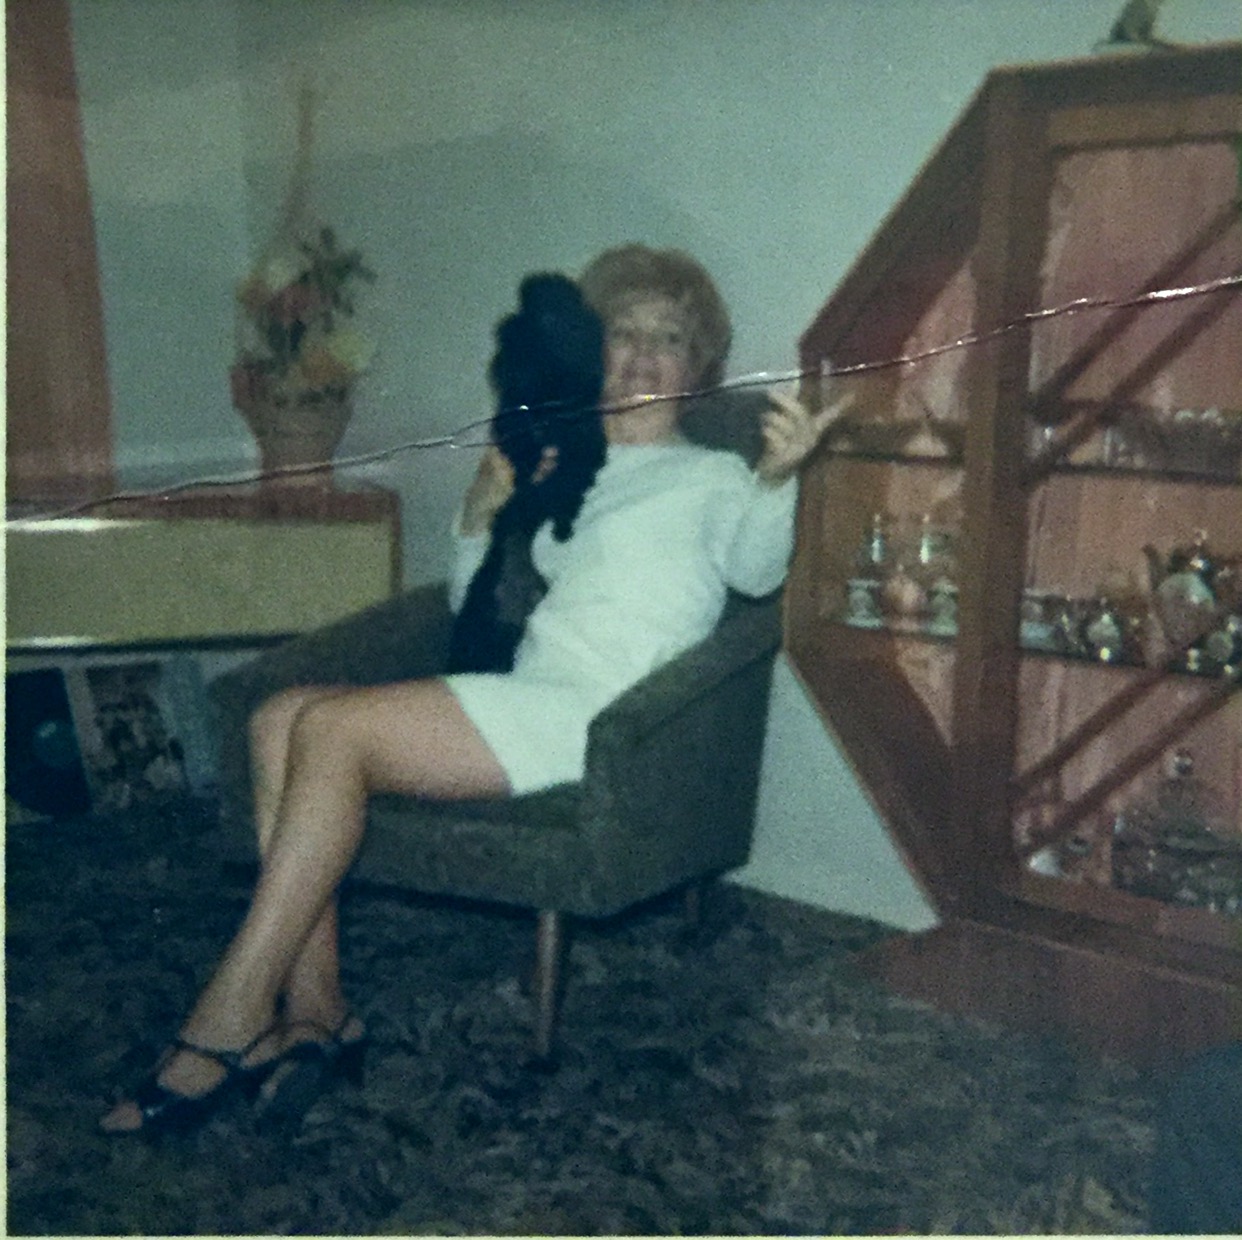 Typical 1960s decor and clothing